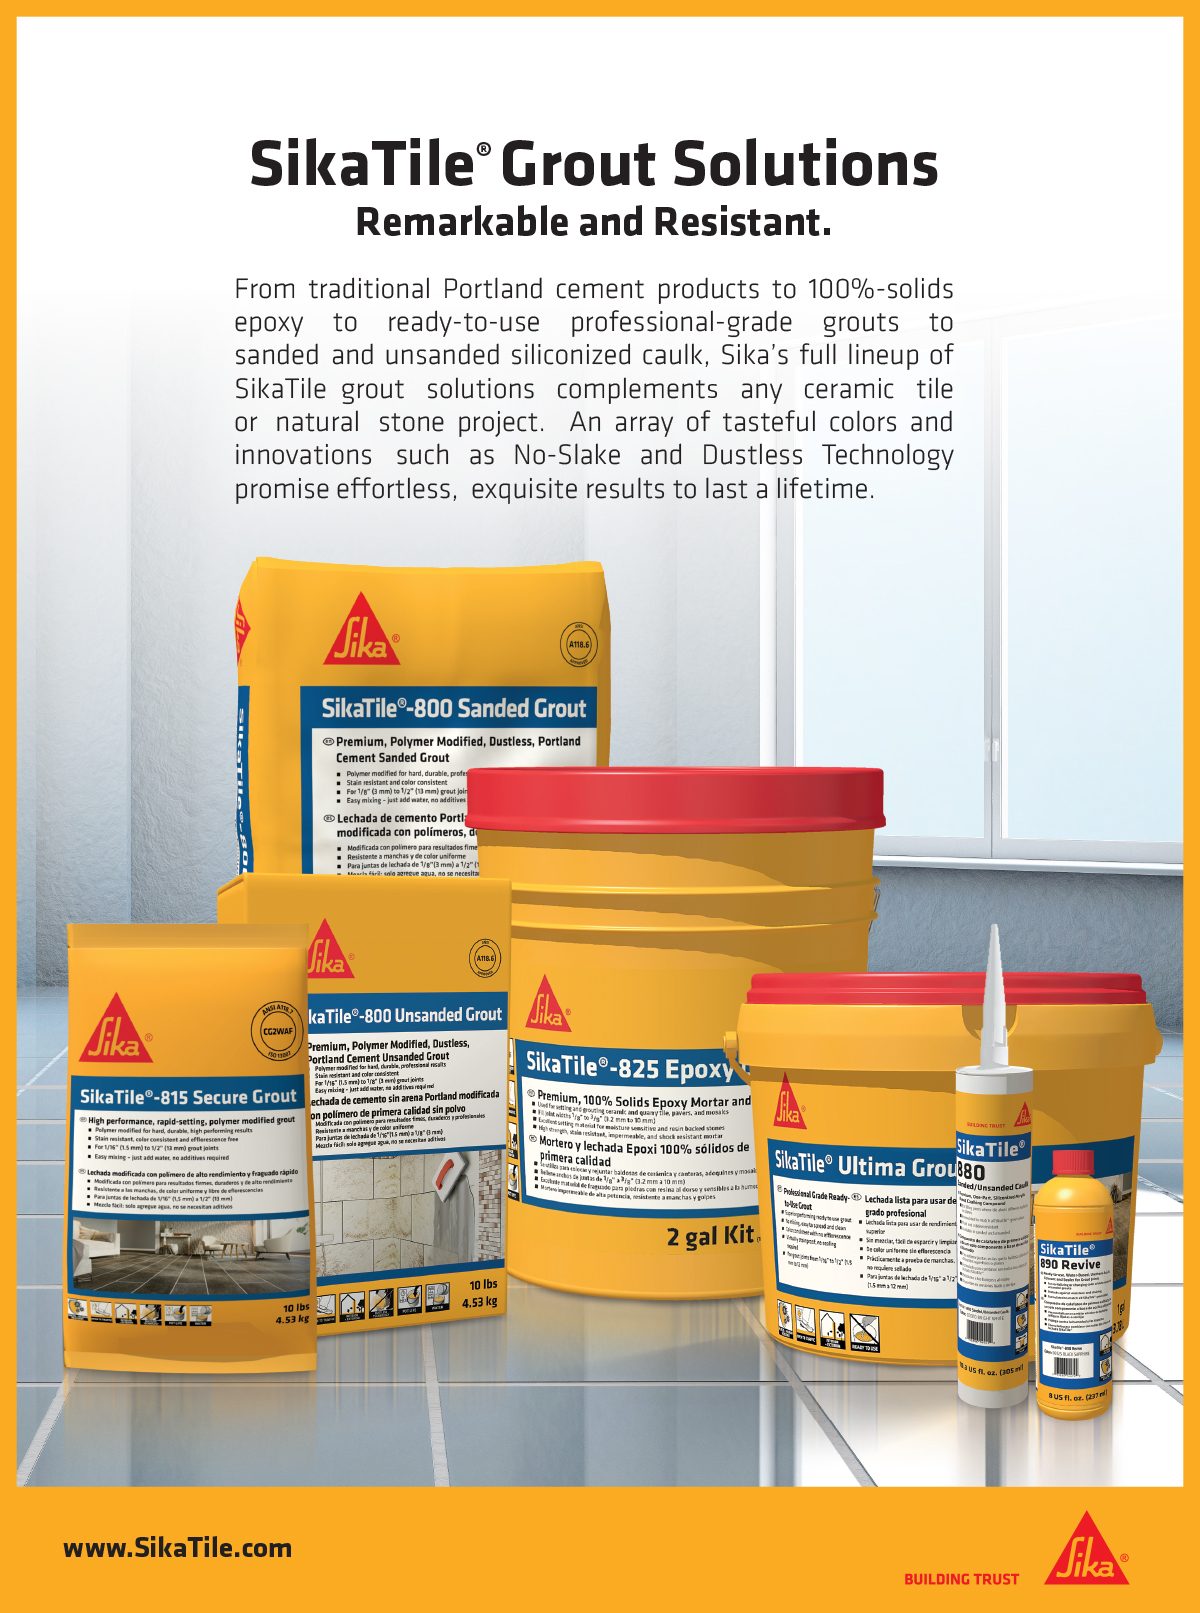 PAREX Usa, INC, Sika, grout